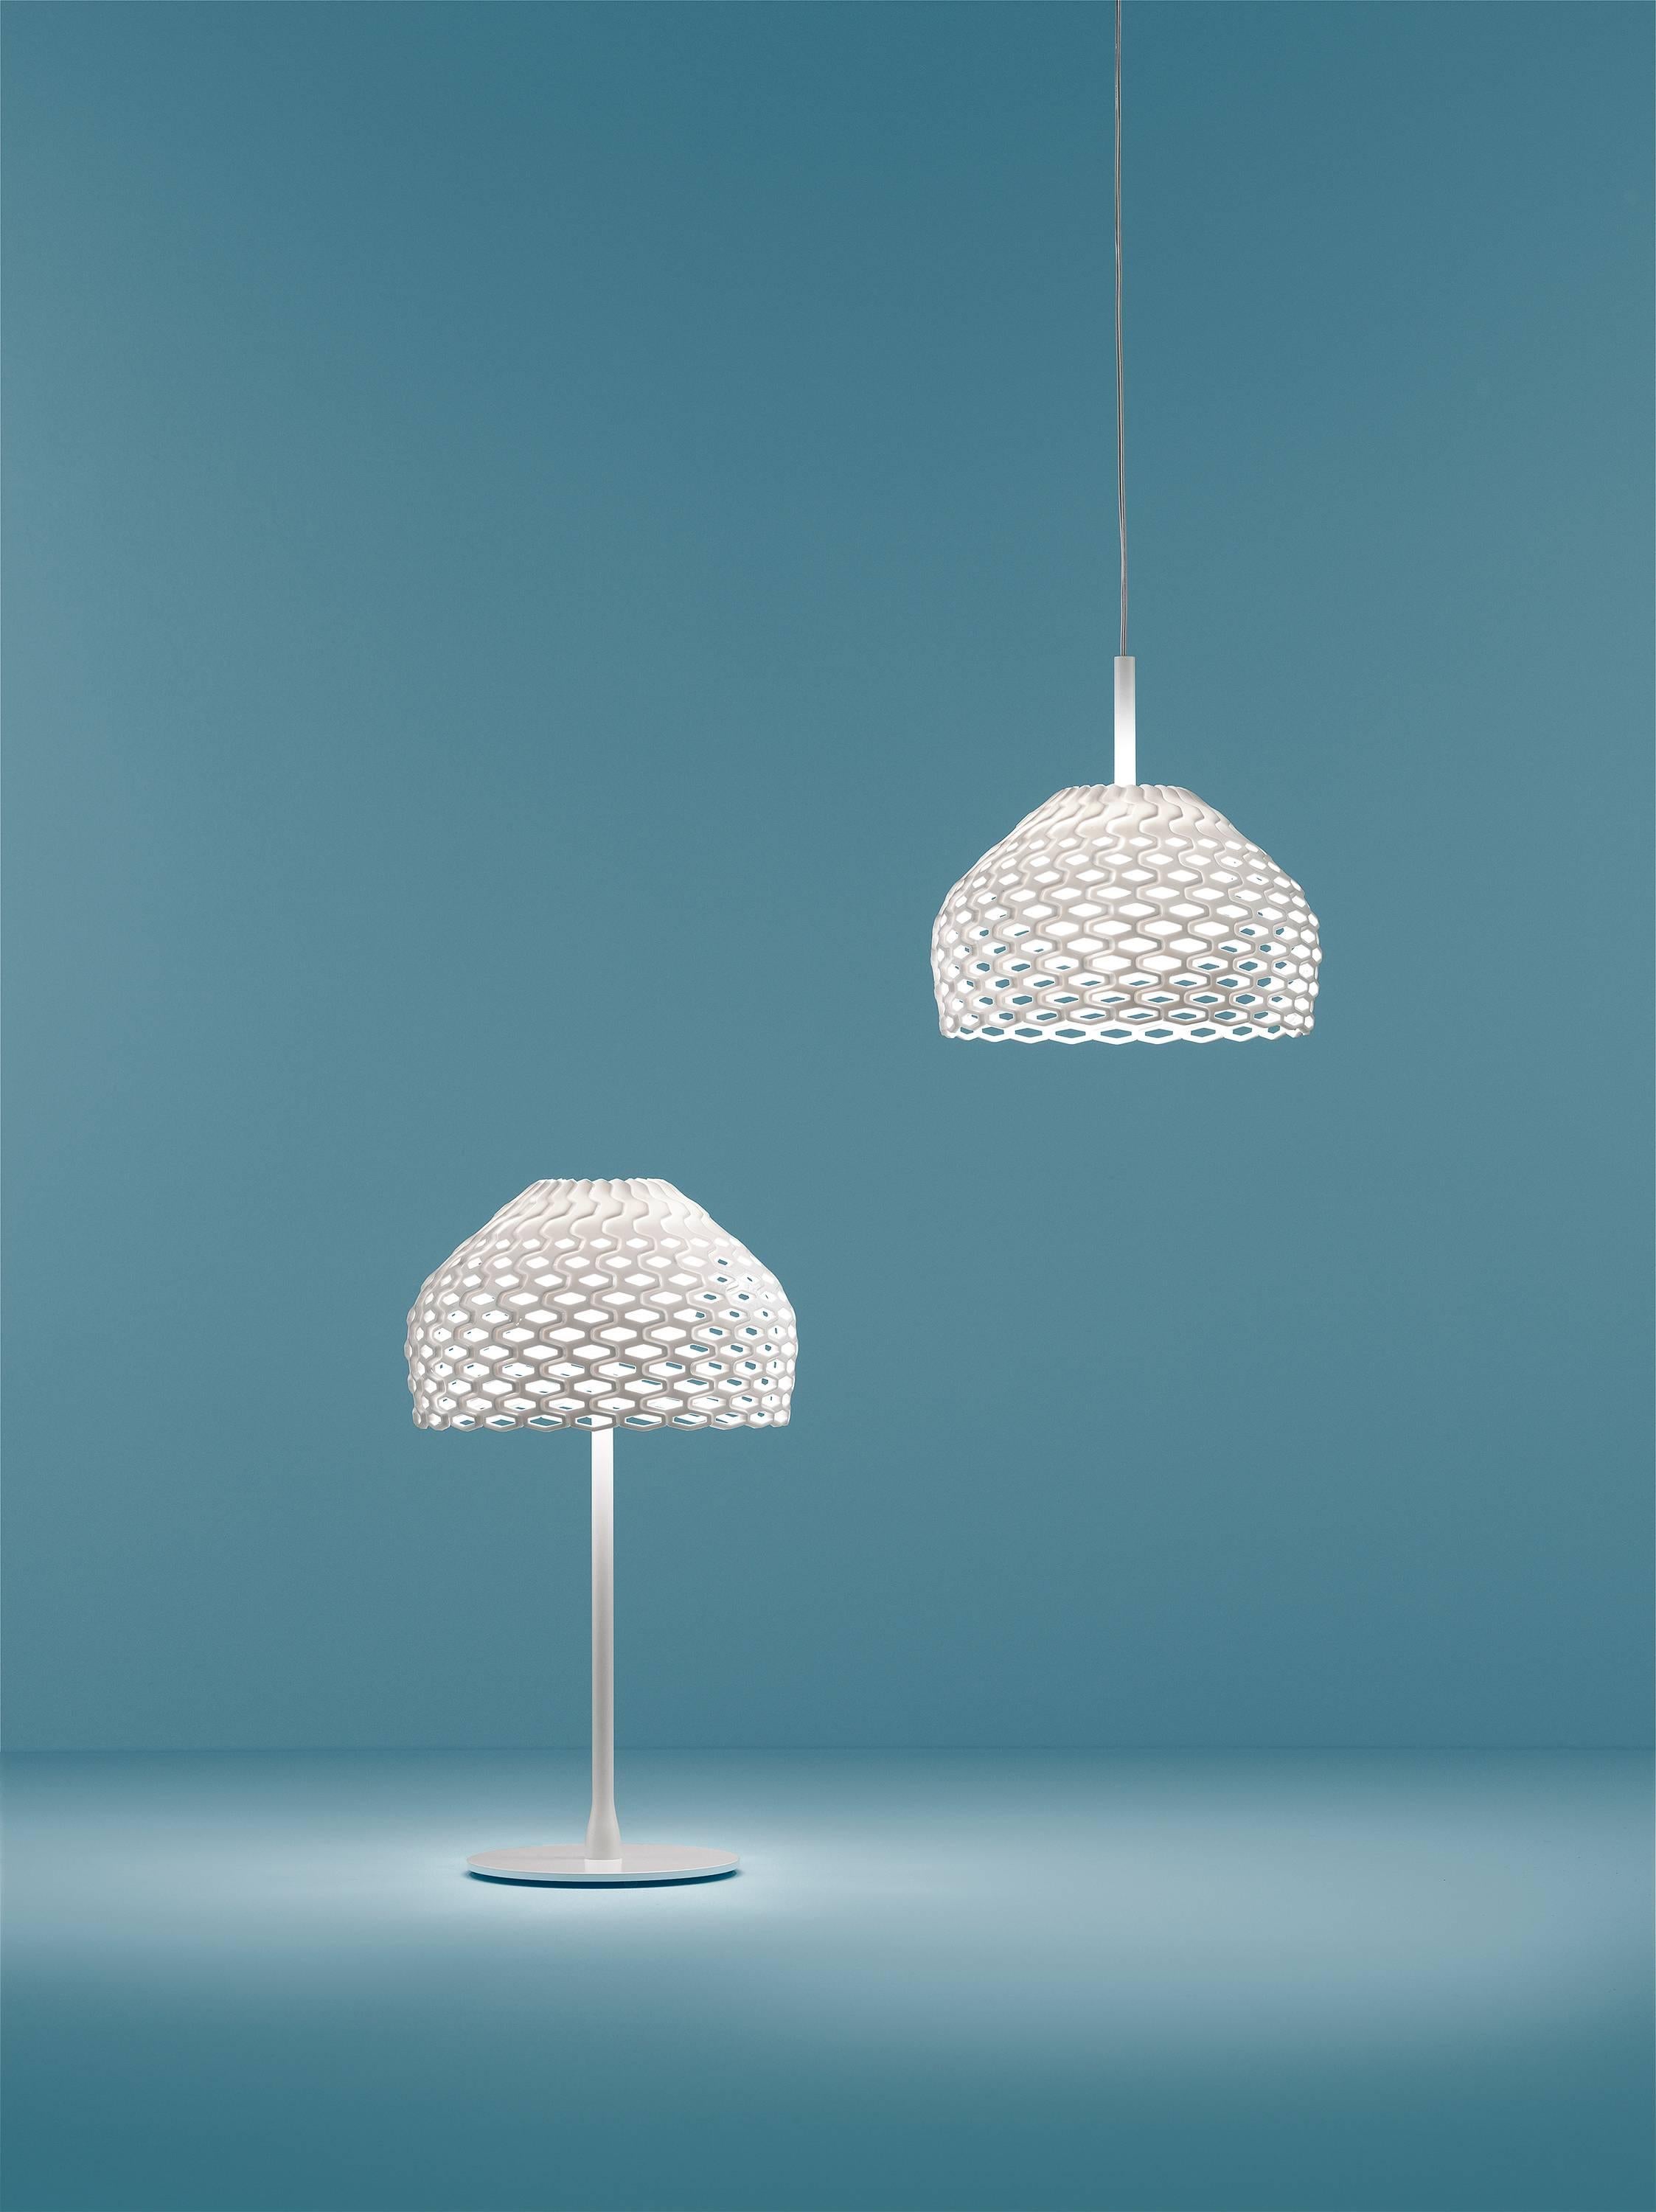 Its name is French for “armadillo,” the unassuming animal whose brilliant structure keeps it protected—and makes it unique. Designer Patricia Urquiola conceptualized this table lamp to play on the filtration of light, with remarkable results.

The